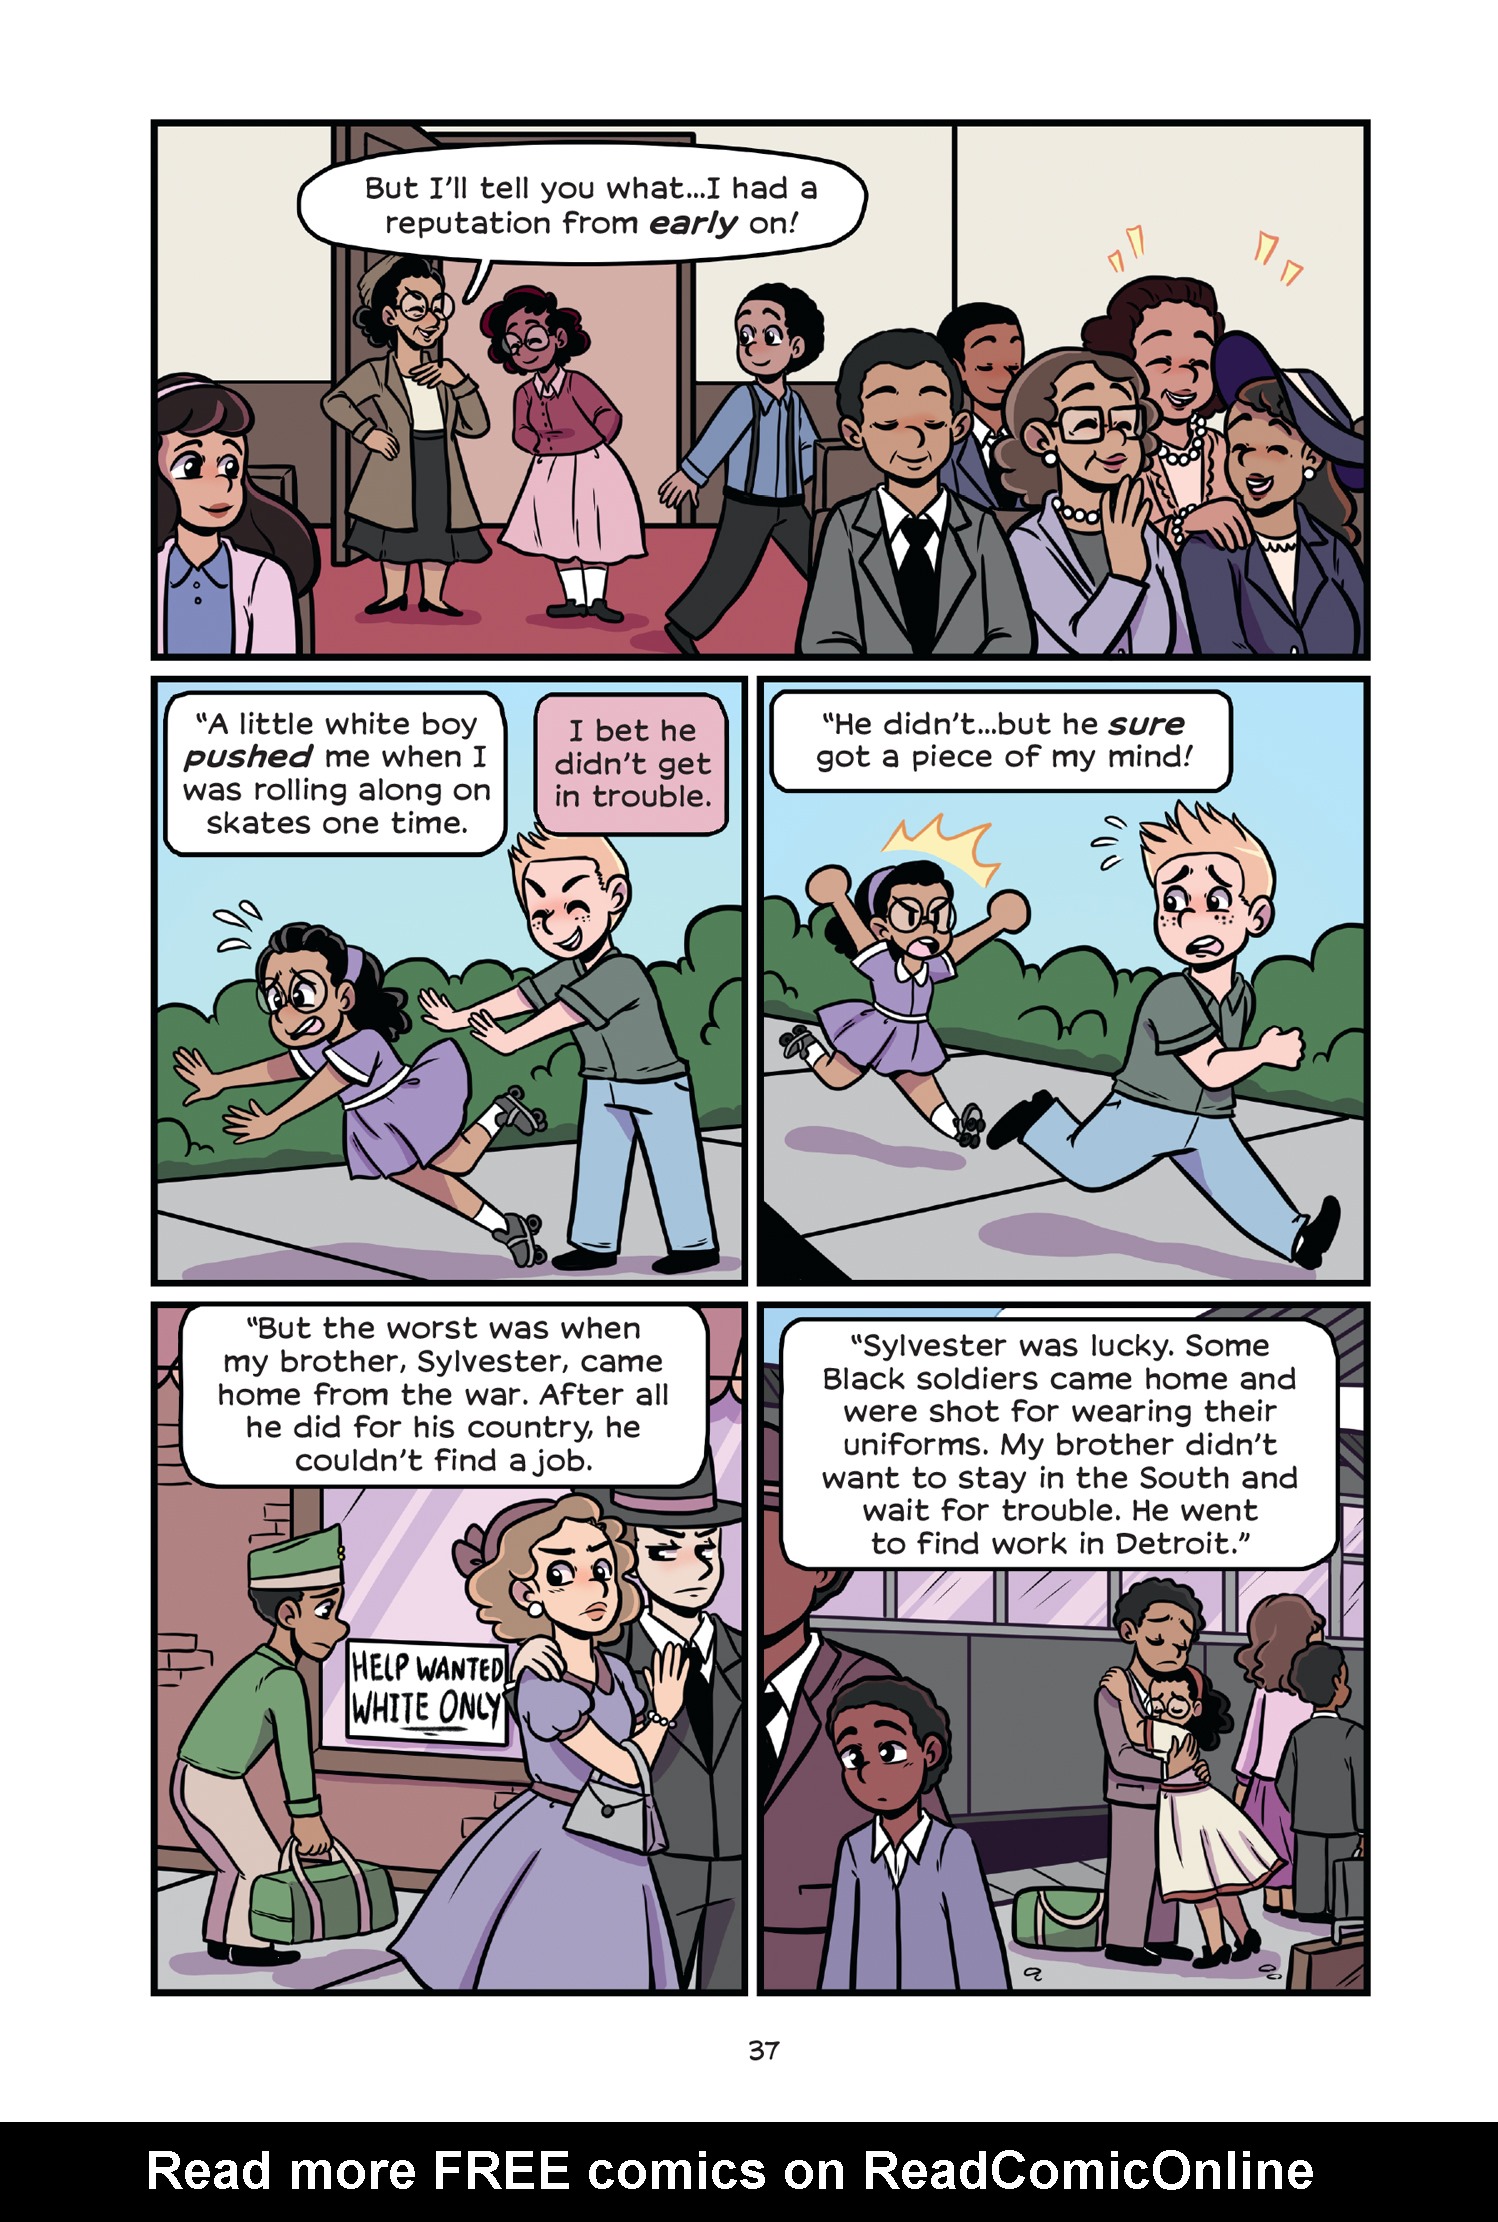 Read online History Comics comic -  Issue # Rosa Parks & Claudette Colvin - Civil Rights Heroes - 42